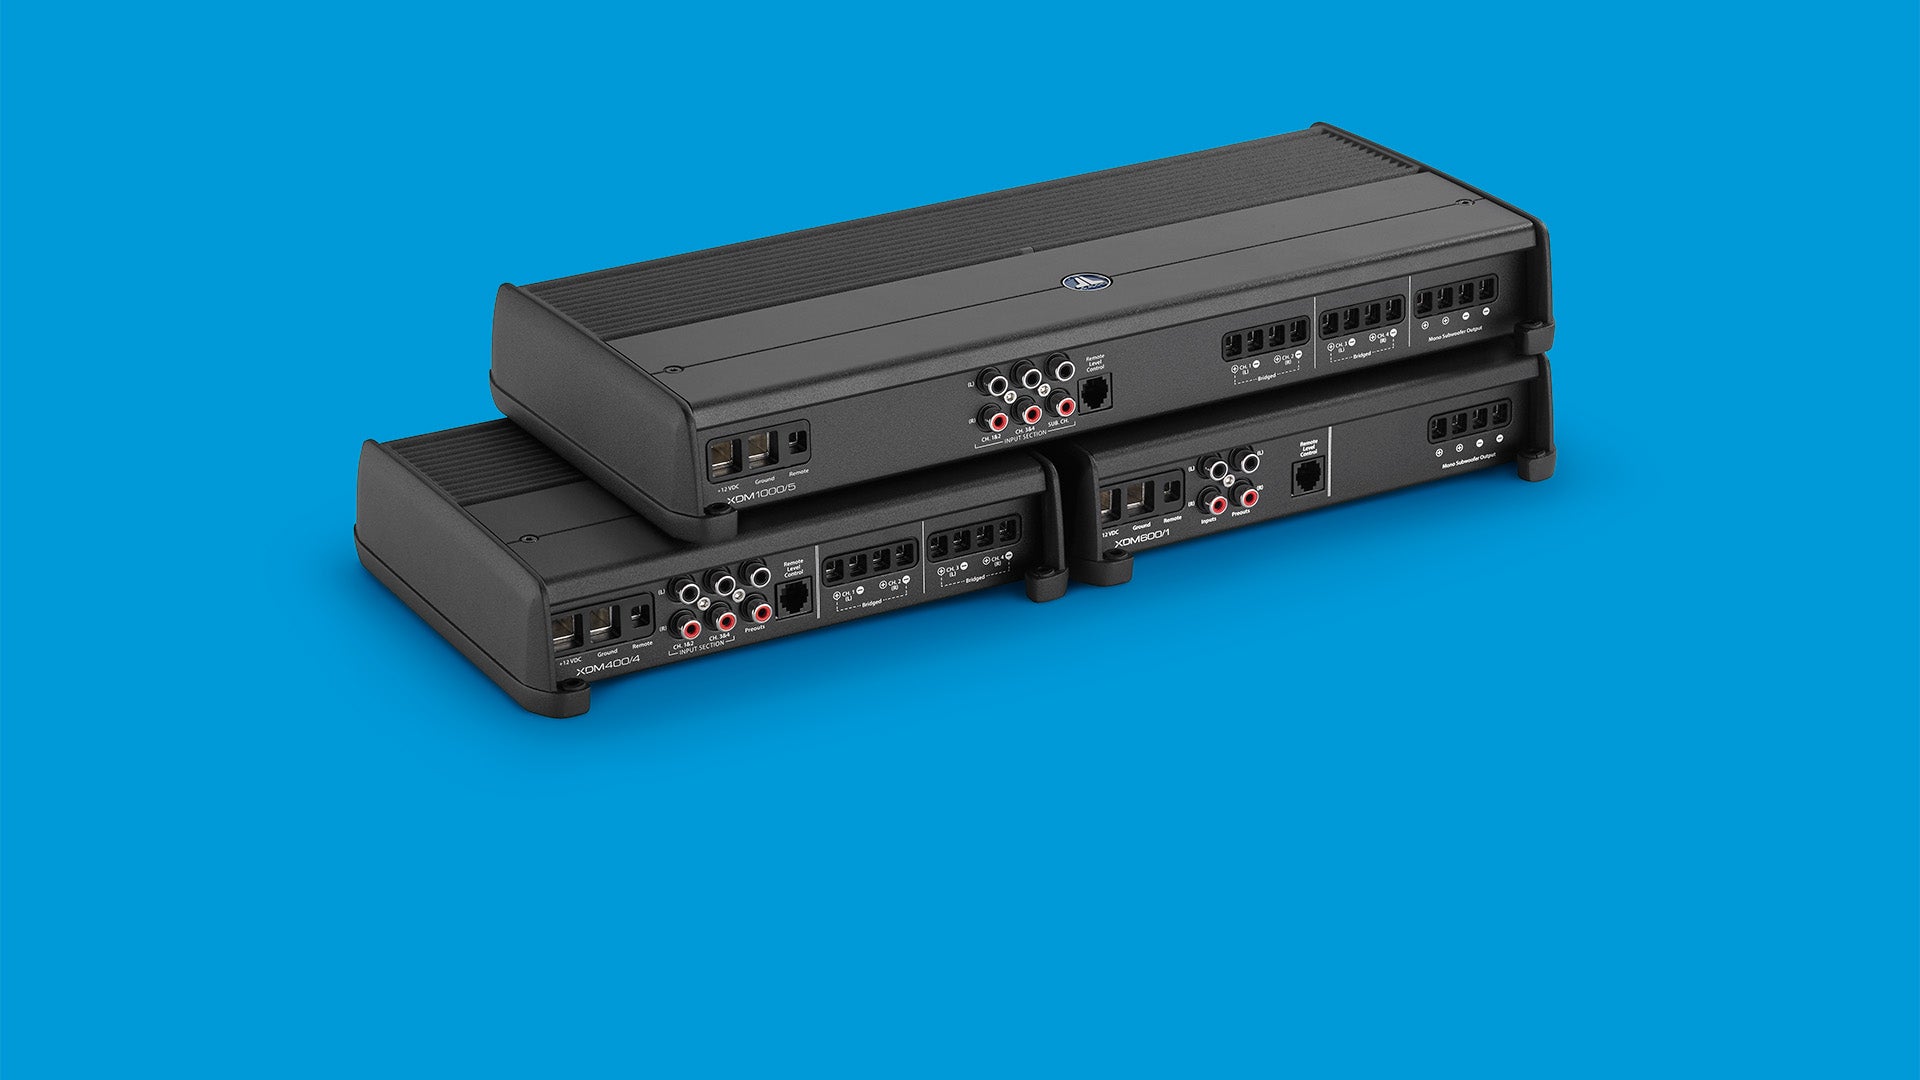 Two rows of XDM amplifiers stack on top of each other.